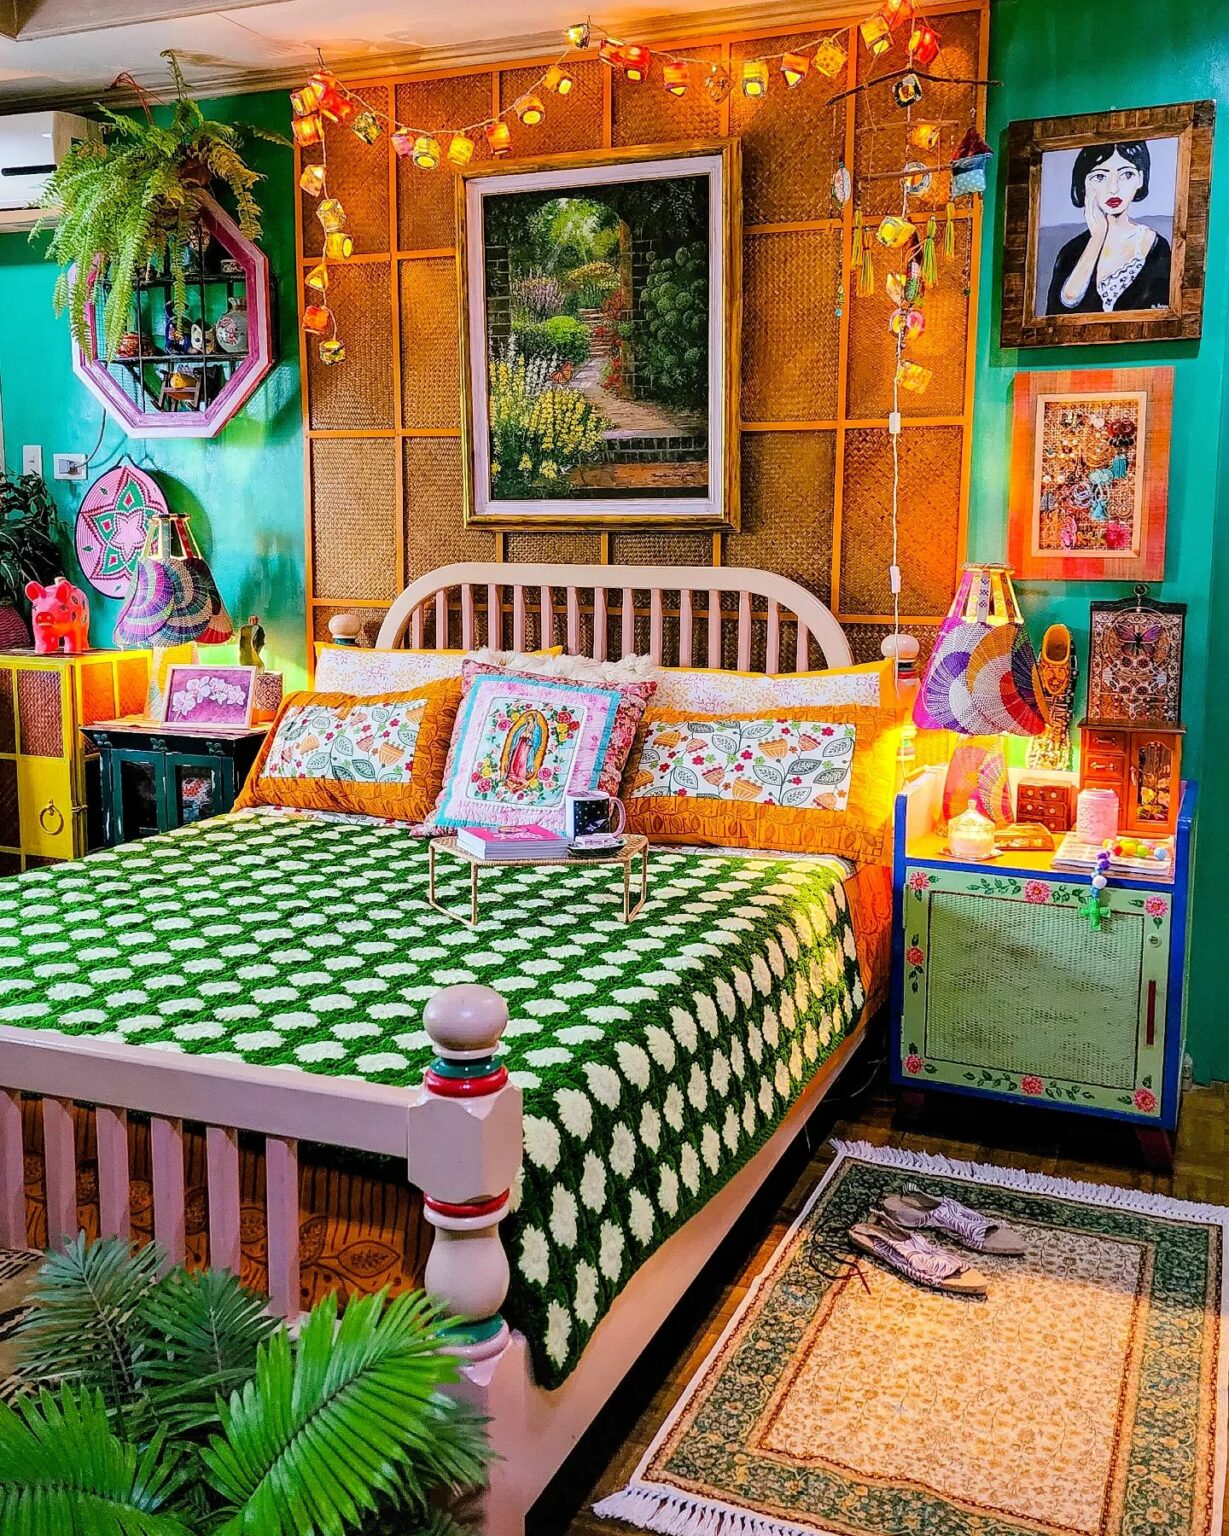 30 Gypsy Boho Bedroom Ideas For Your Own Bohemian Oasis No Minimalist Here